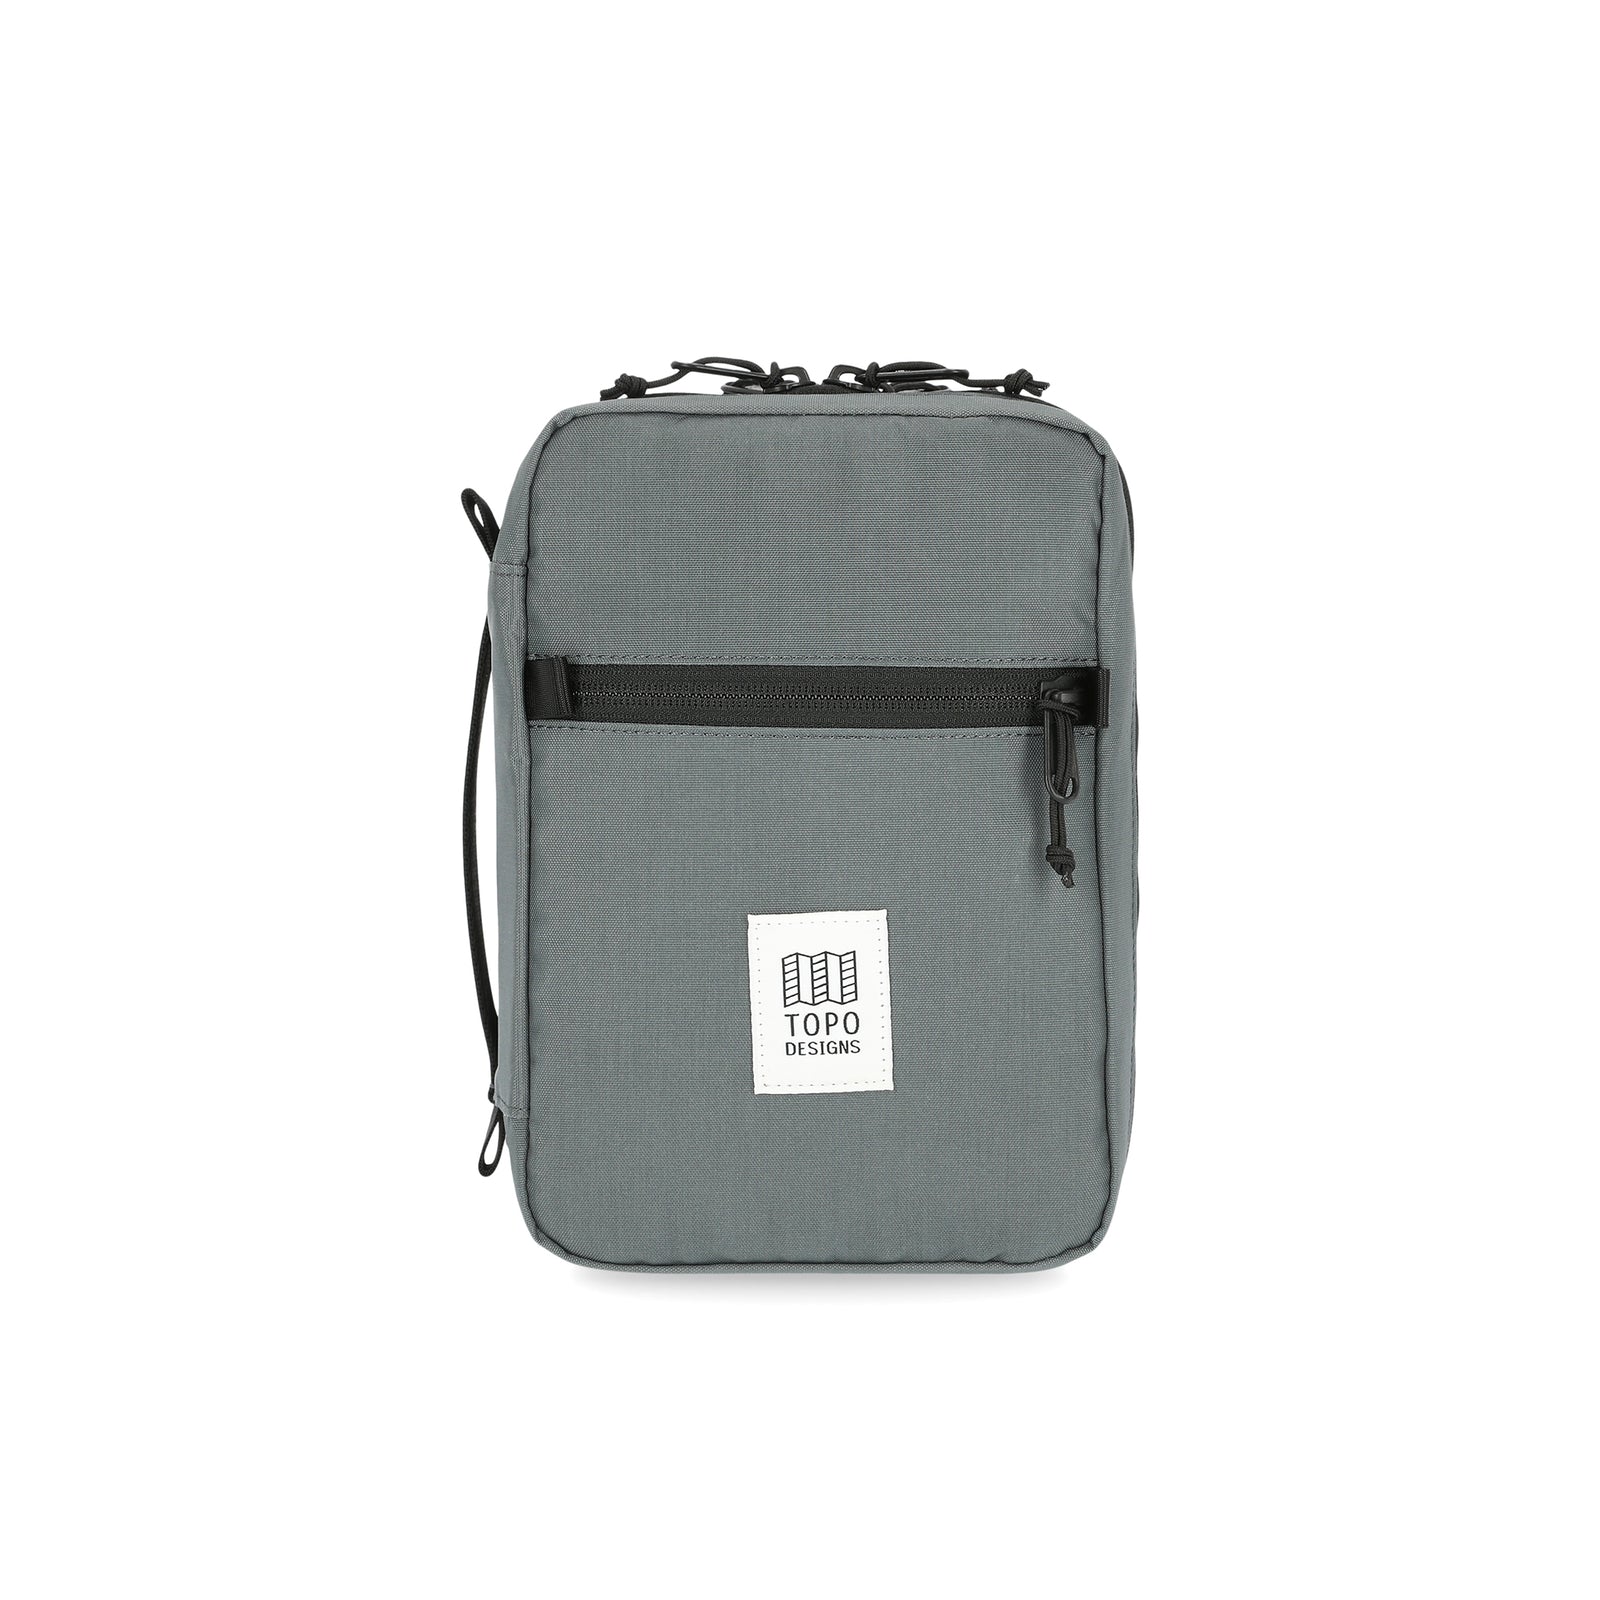 Topo Designs Tech electronics organization travel Case in "Charcoal" gray recycled nylon.